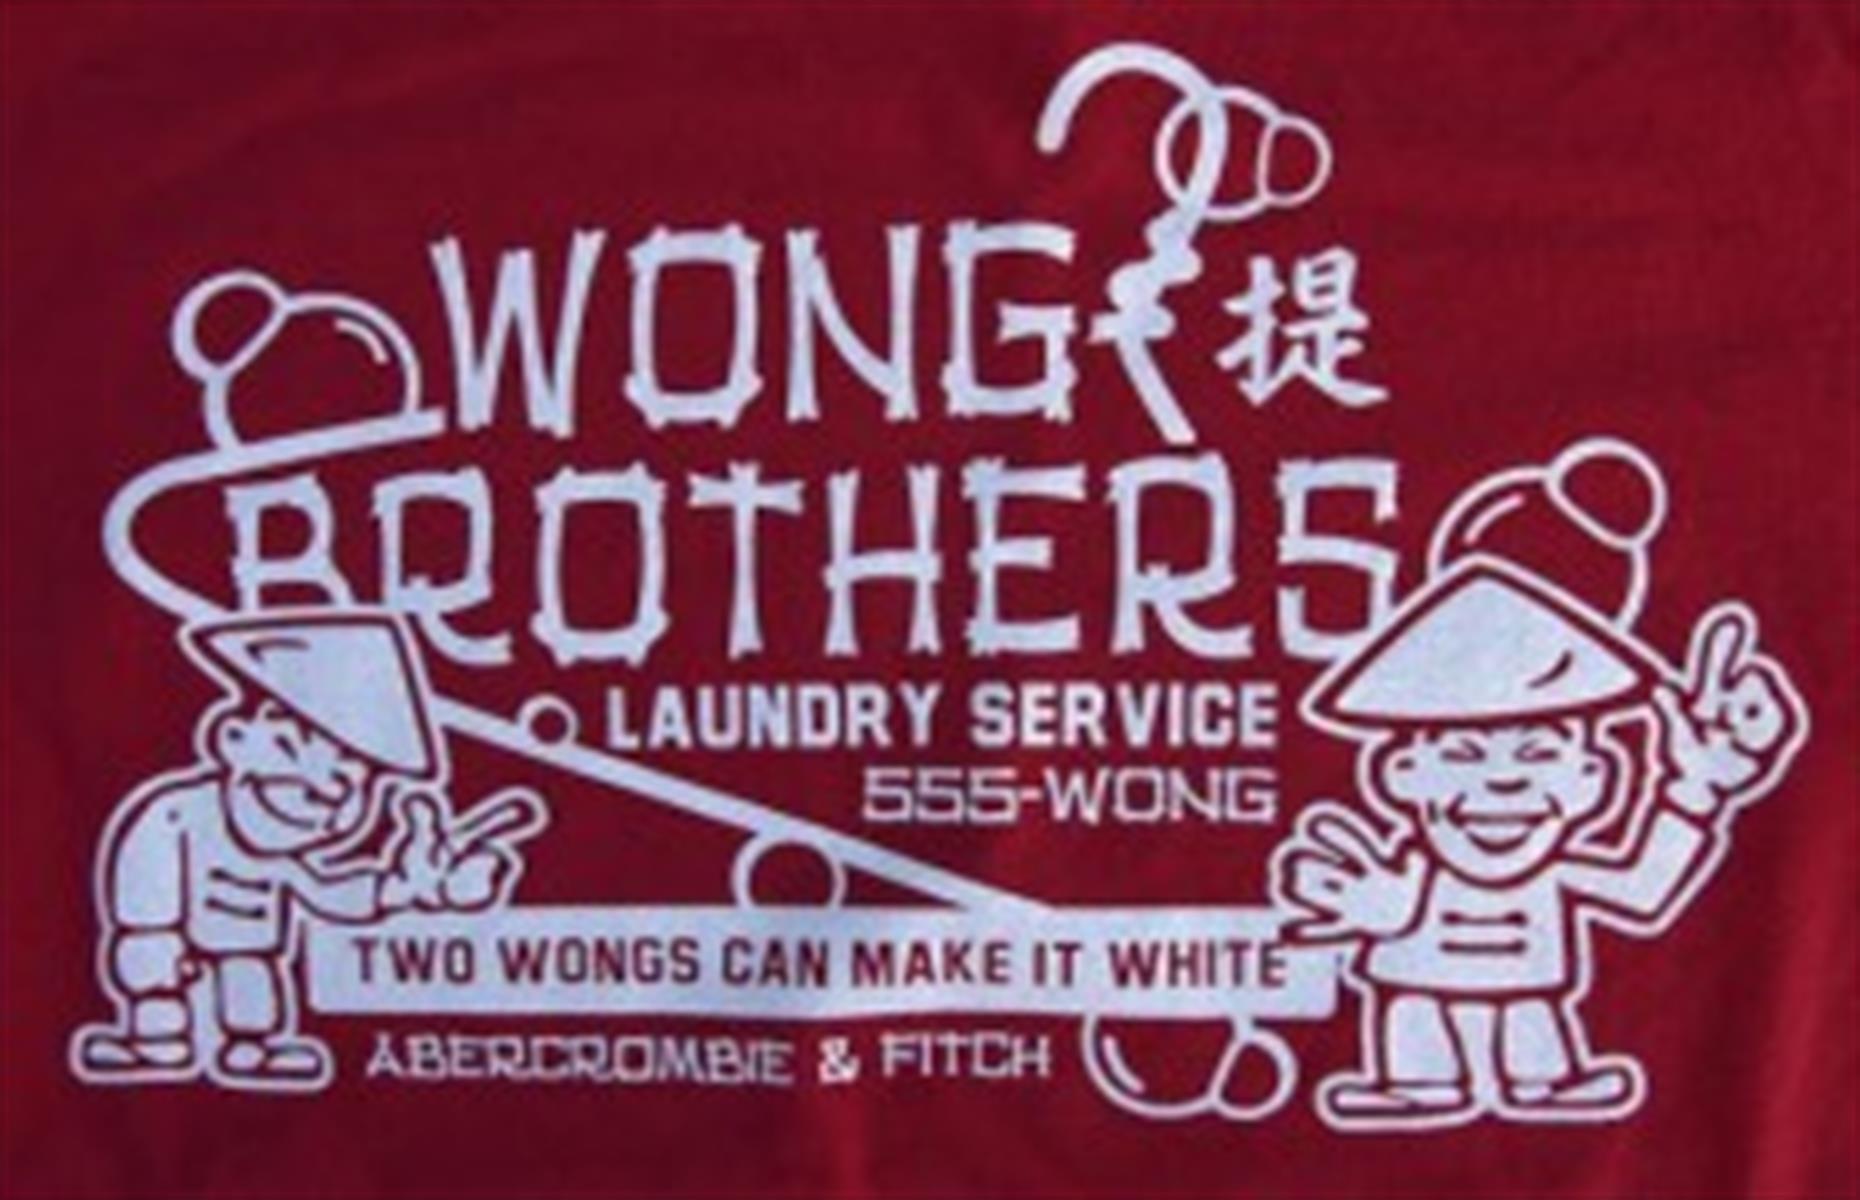 2002: Abercrombie & Fitch 'Wong' T-Shirt